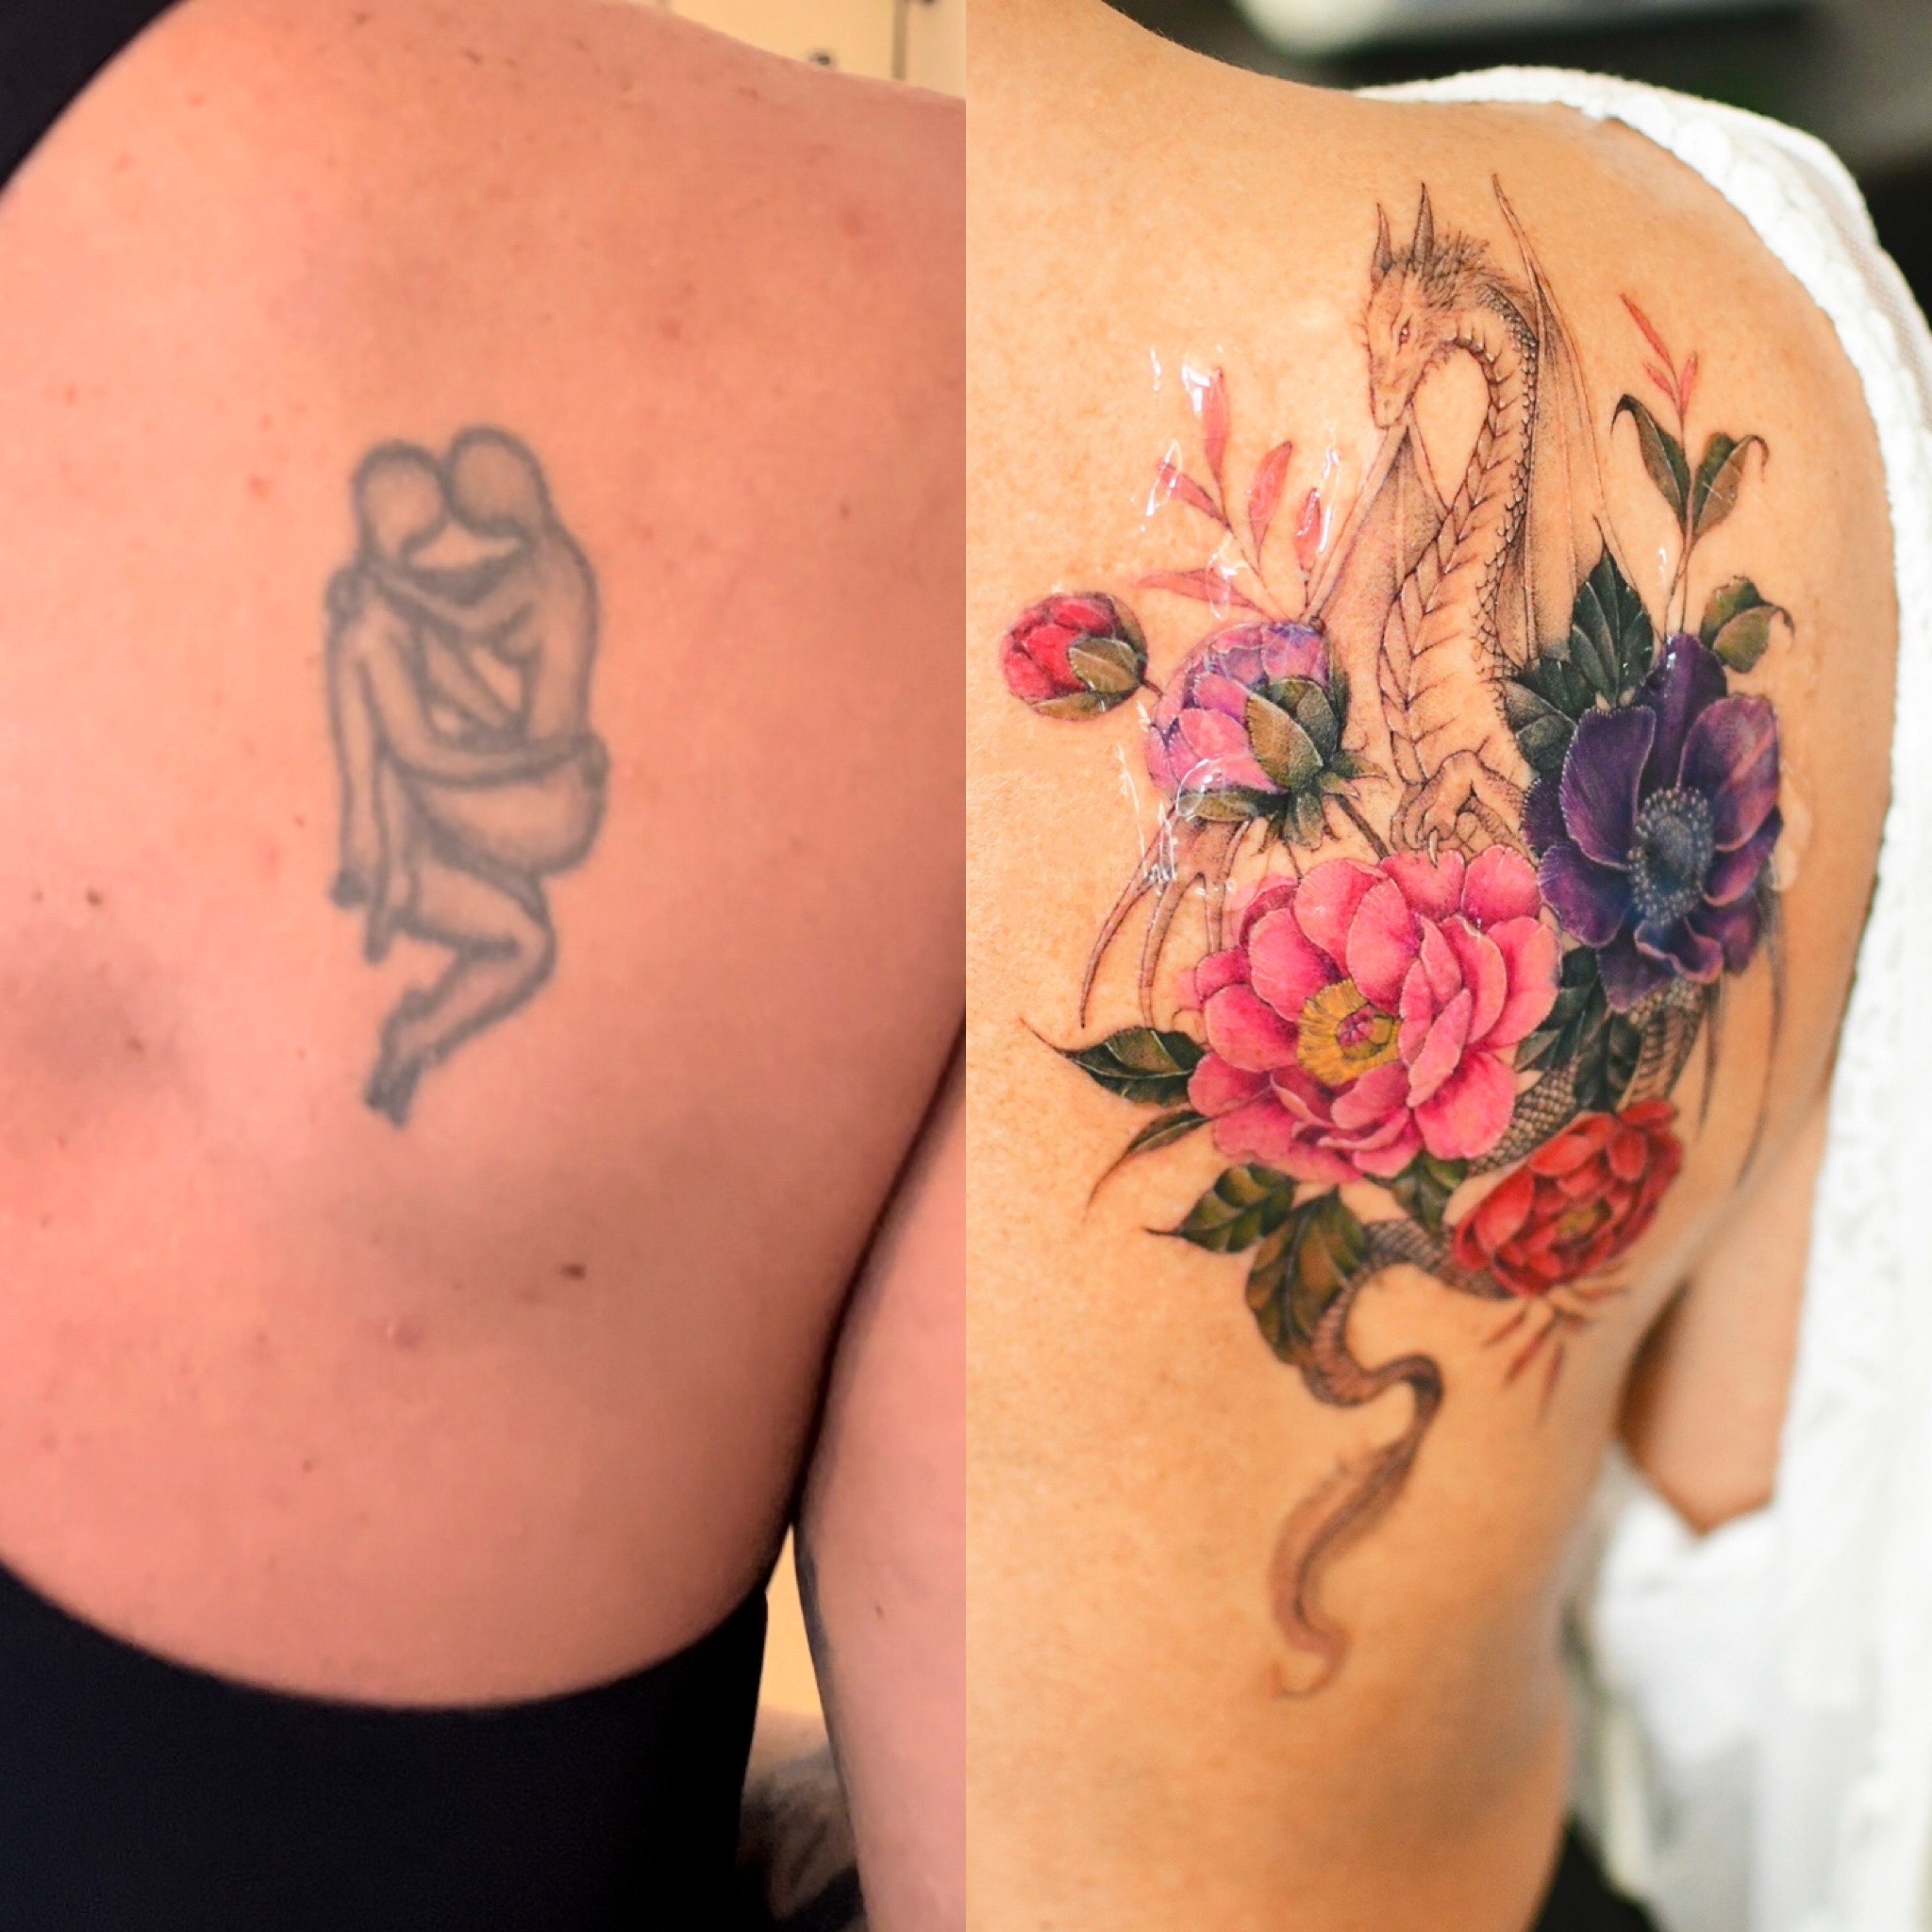 Cover up I got a couple weeks ago Done by Addam at Permanent Paint Tattoo  Ky The design is from Cricket Press  rtattoos